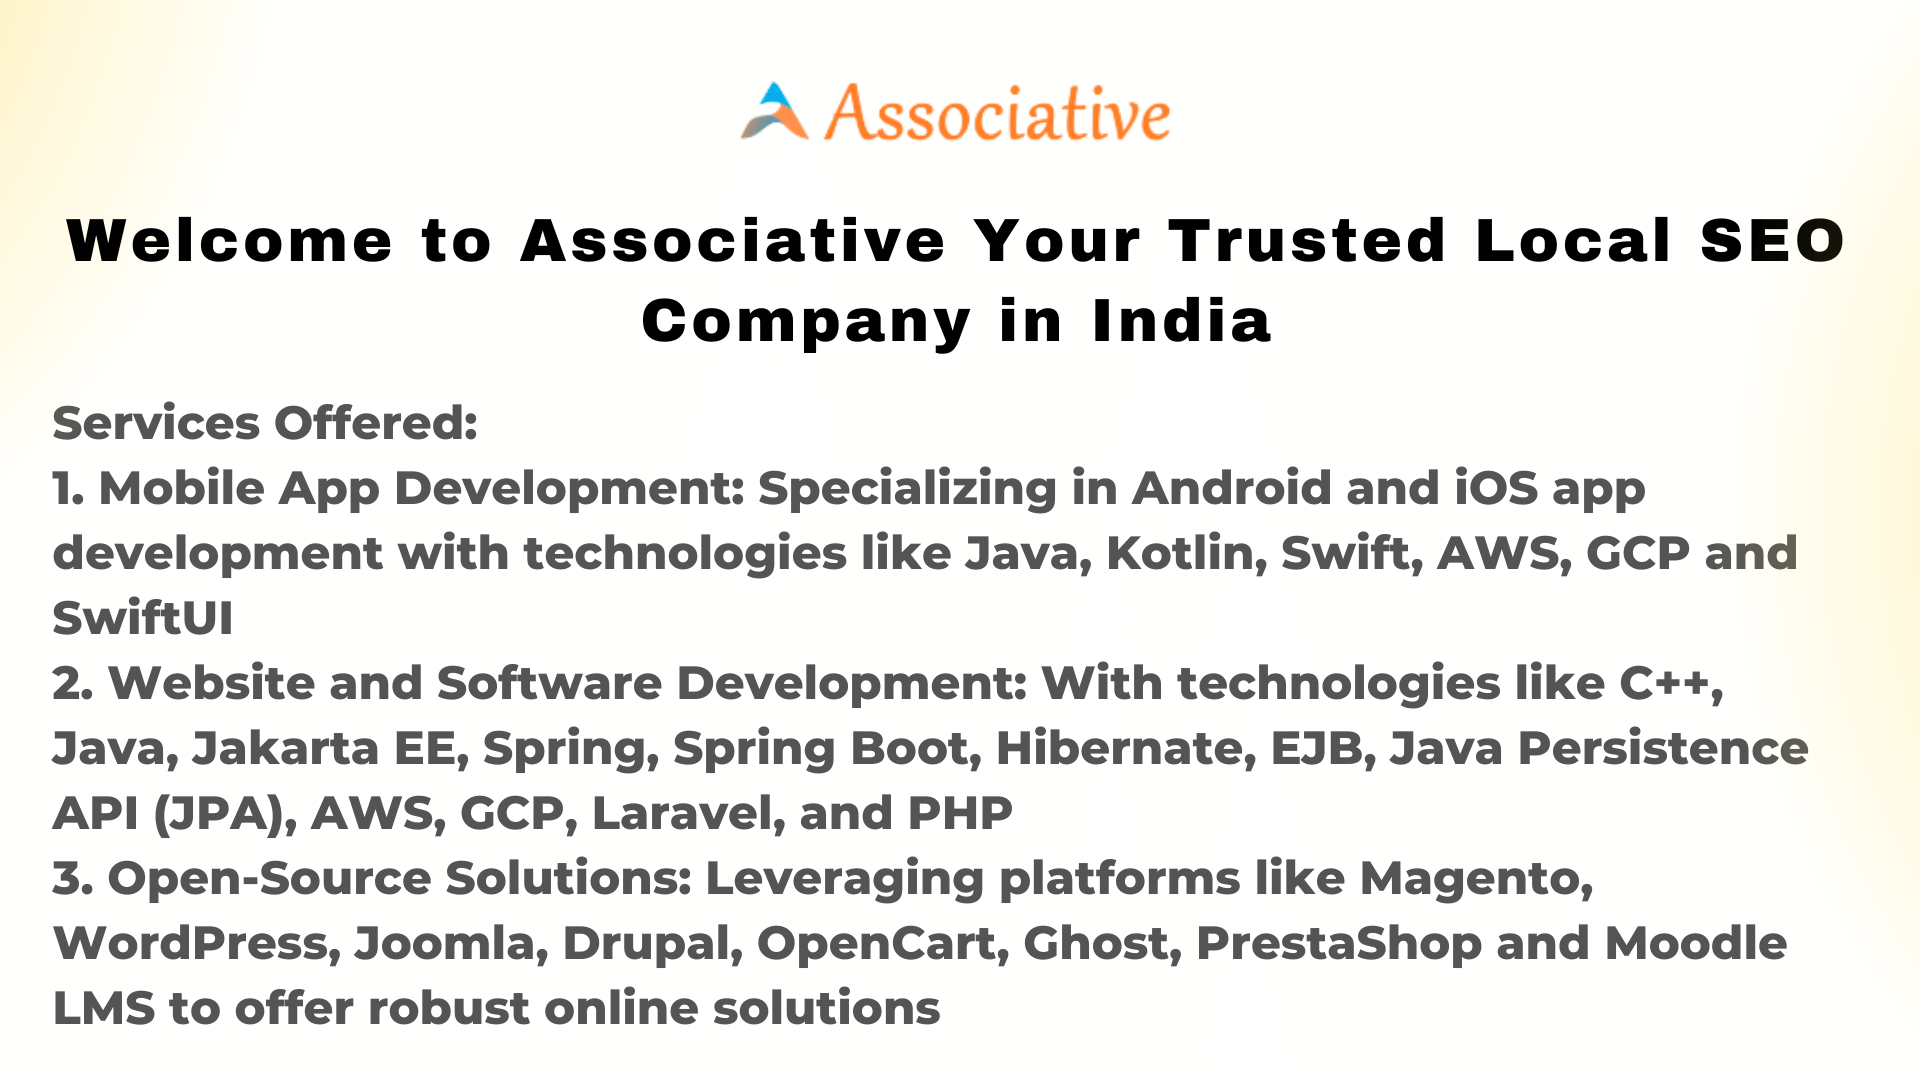 Welcome to Associative Your Trusted Local SEO Company in India